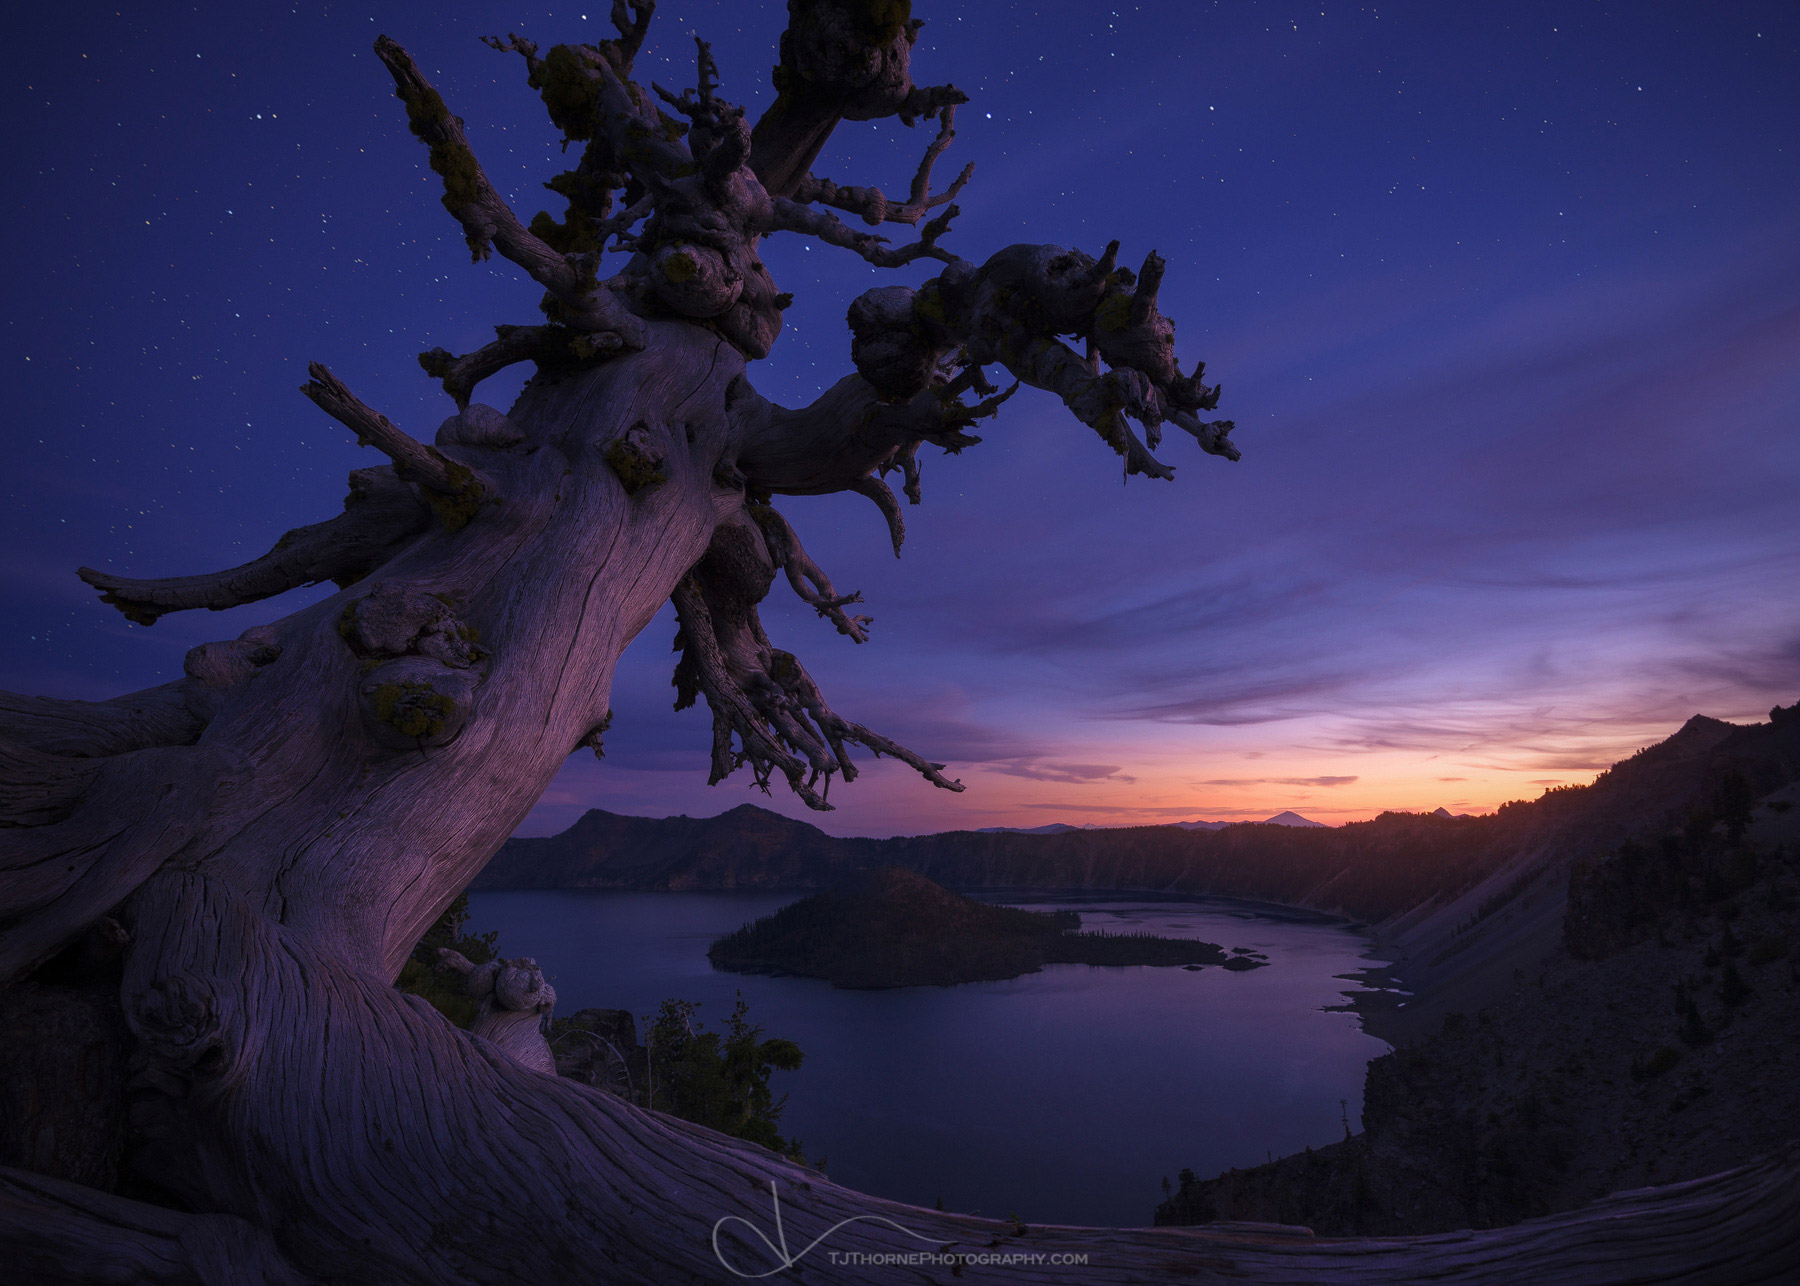 A whitebark pine overlooks Crater Lake under a starry twilight sky. This is the second image from my two week long artist-in-...